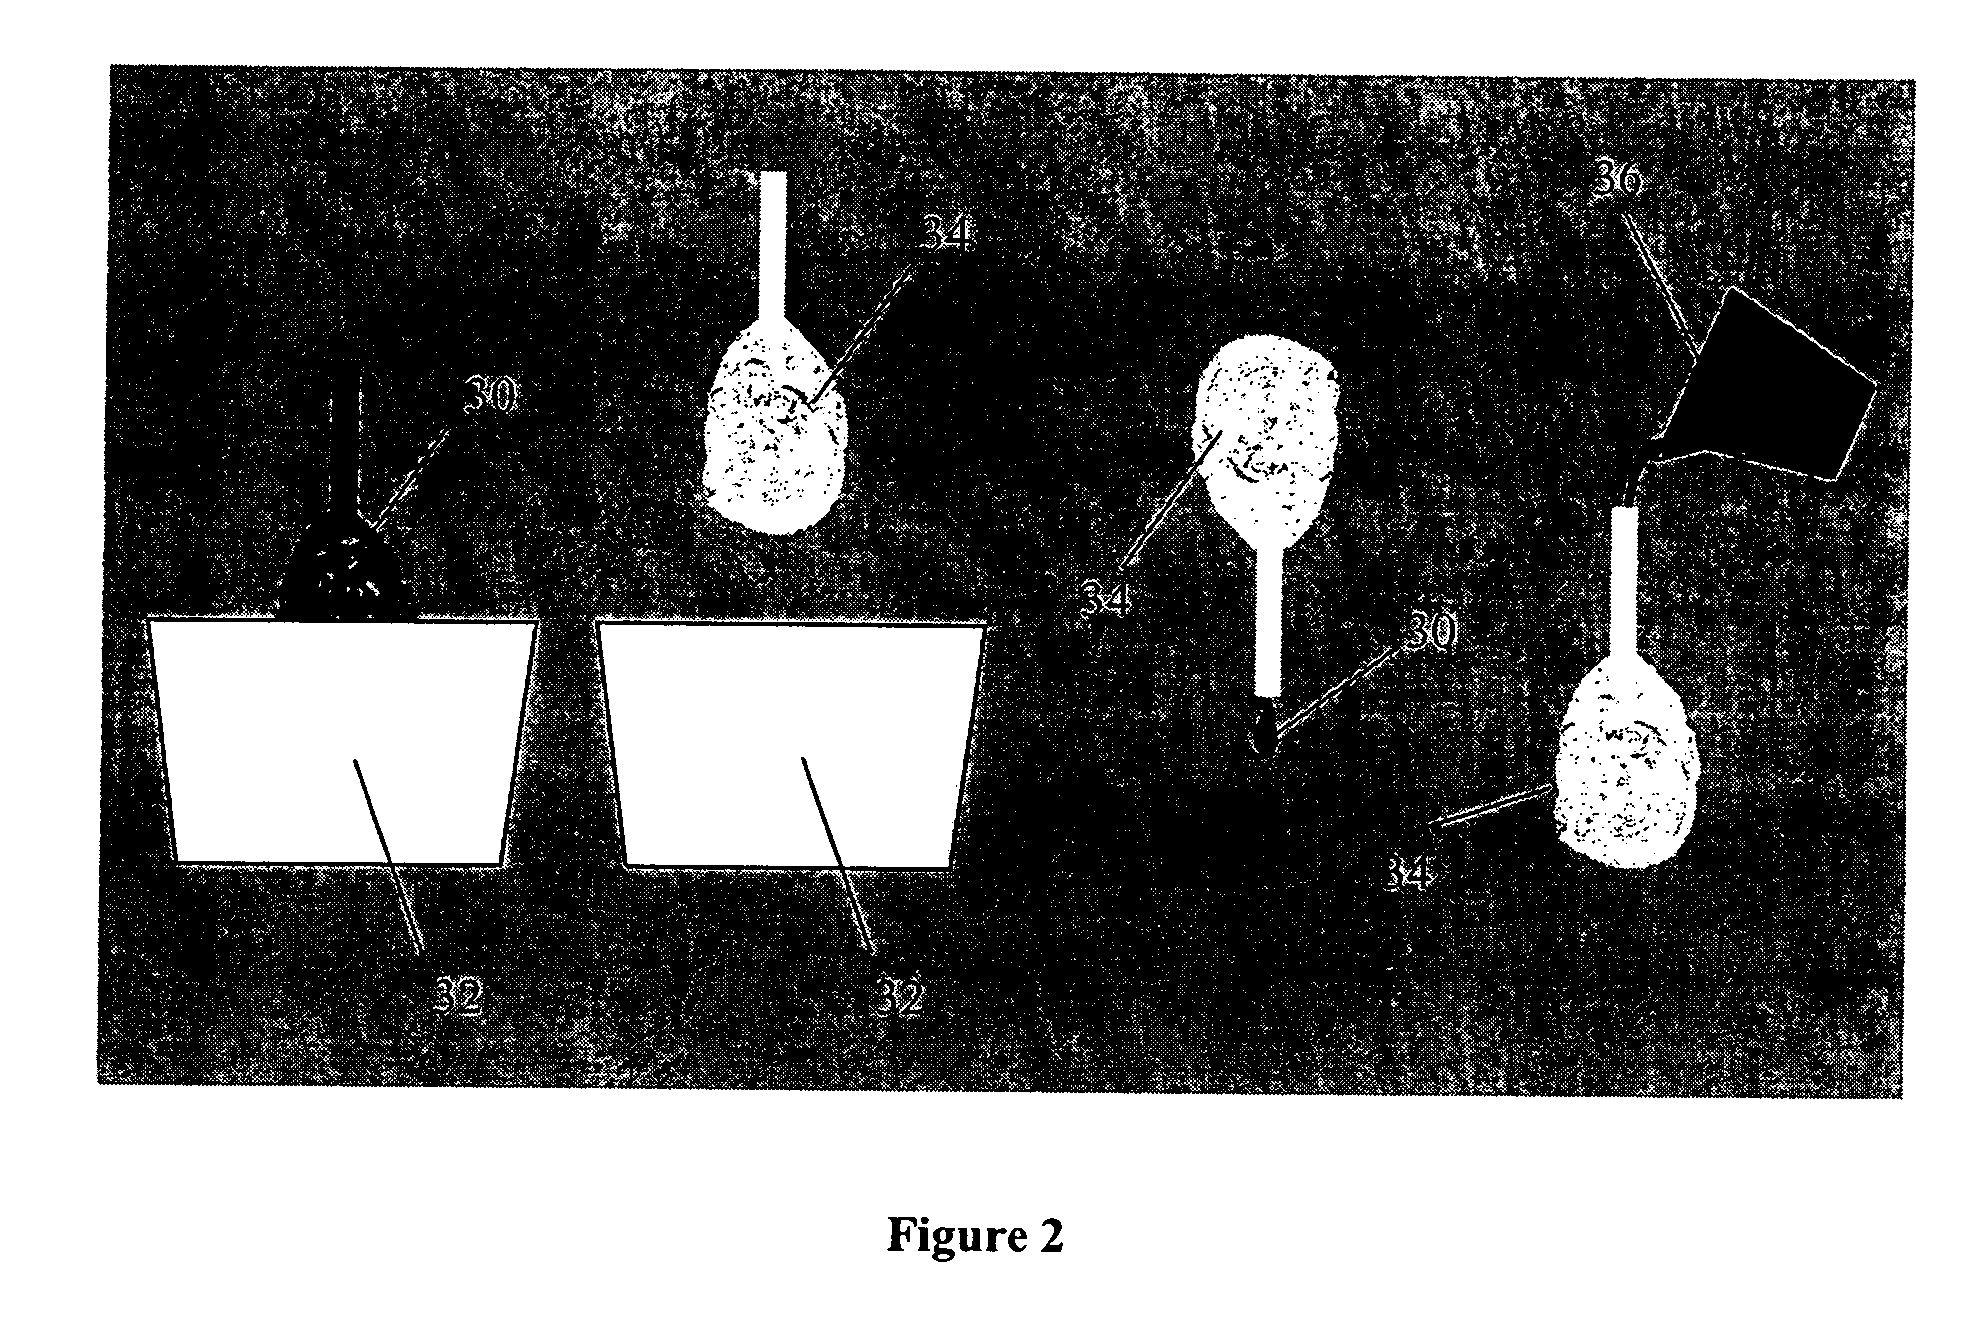 Investment casting slurry composition and method of use